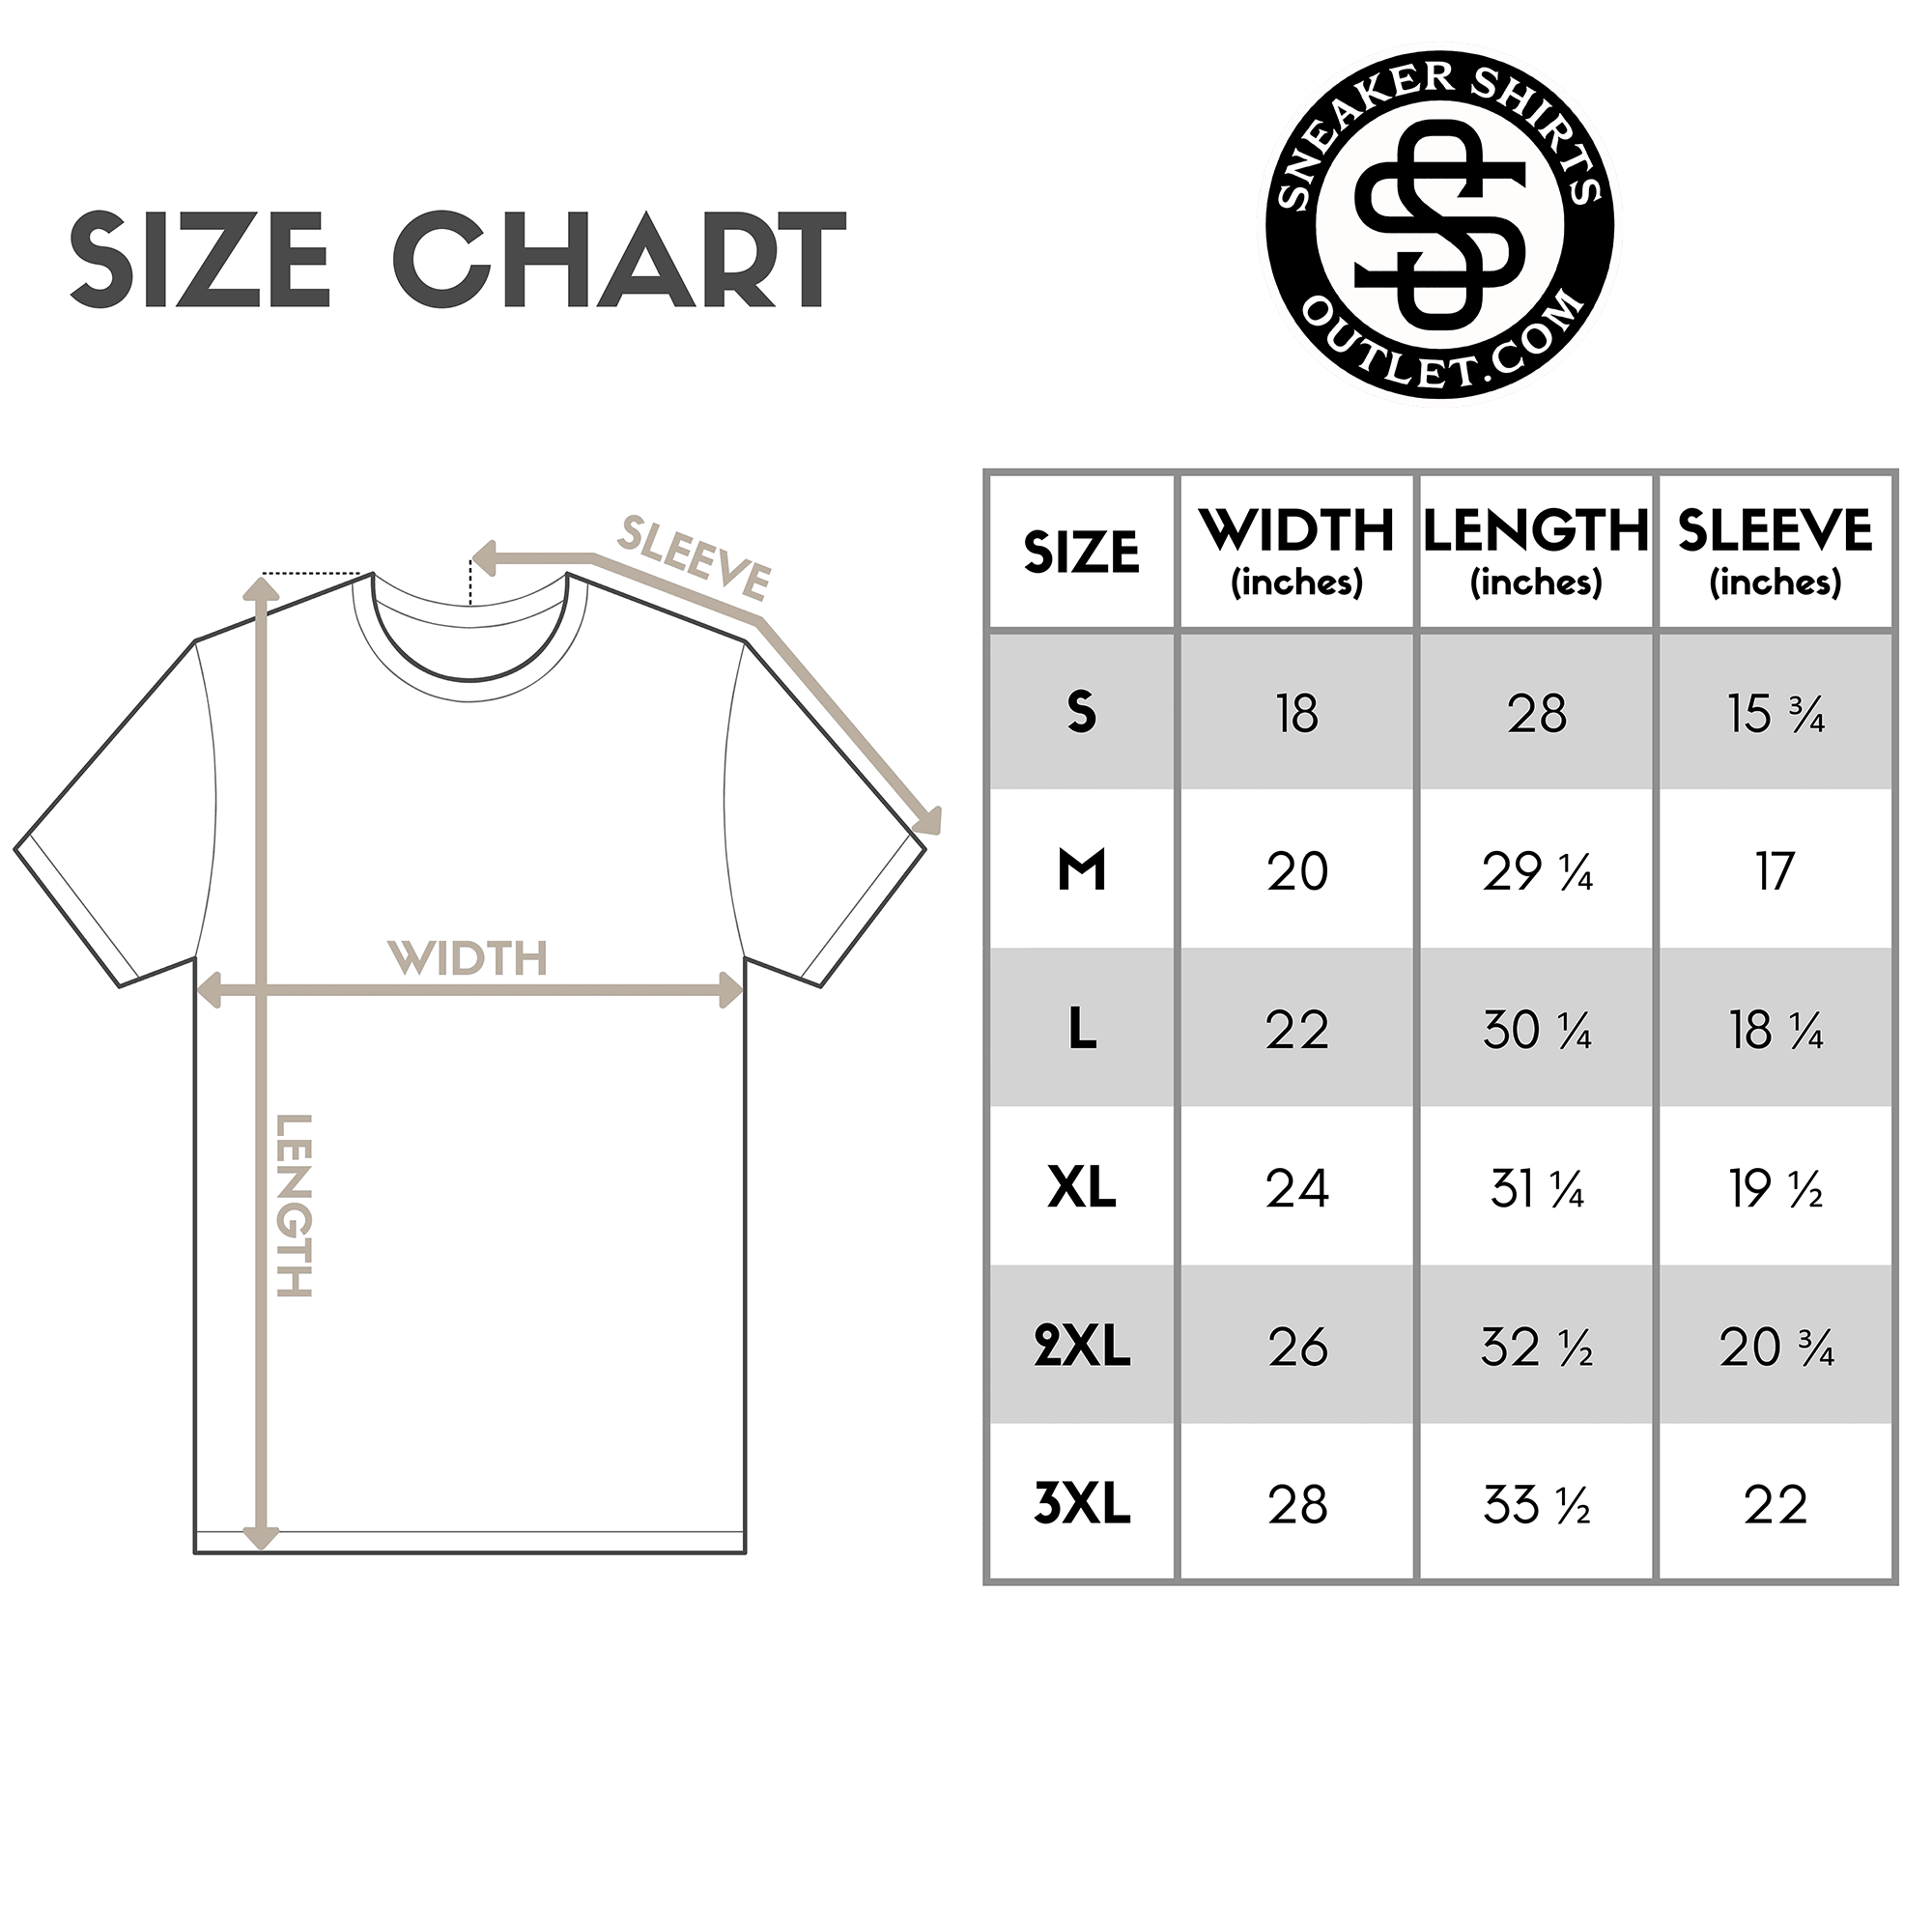 size char tSuccess Nutrition Facts Shirt AJ 4 Fire Red photo